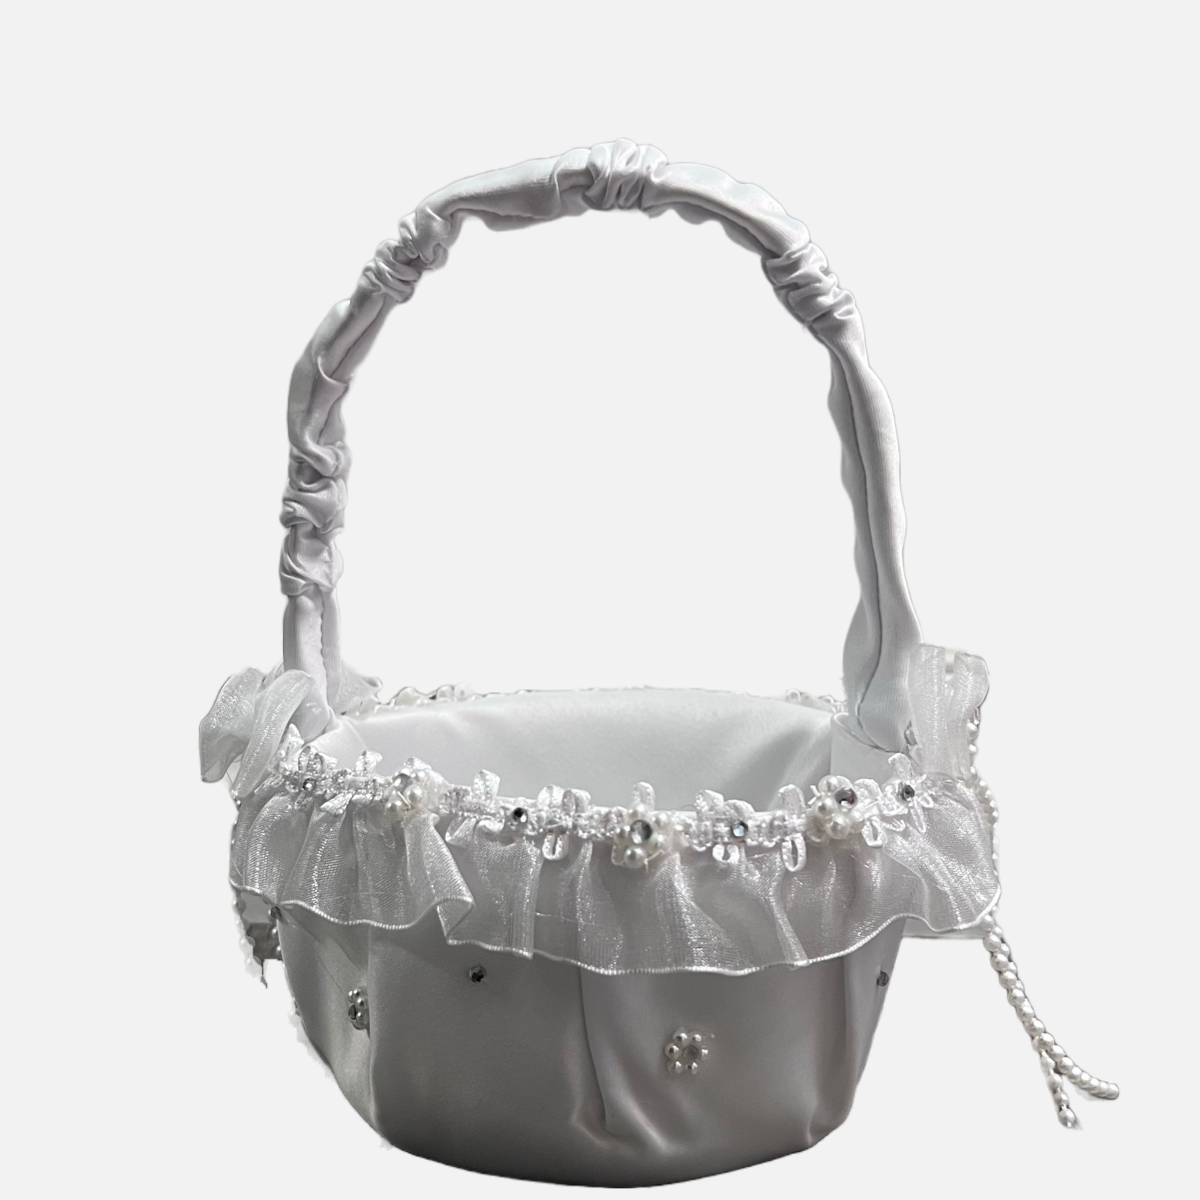 Flower Girl Basket with Rhinestones and Pearls